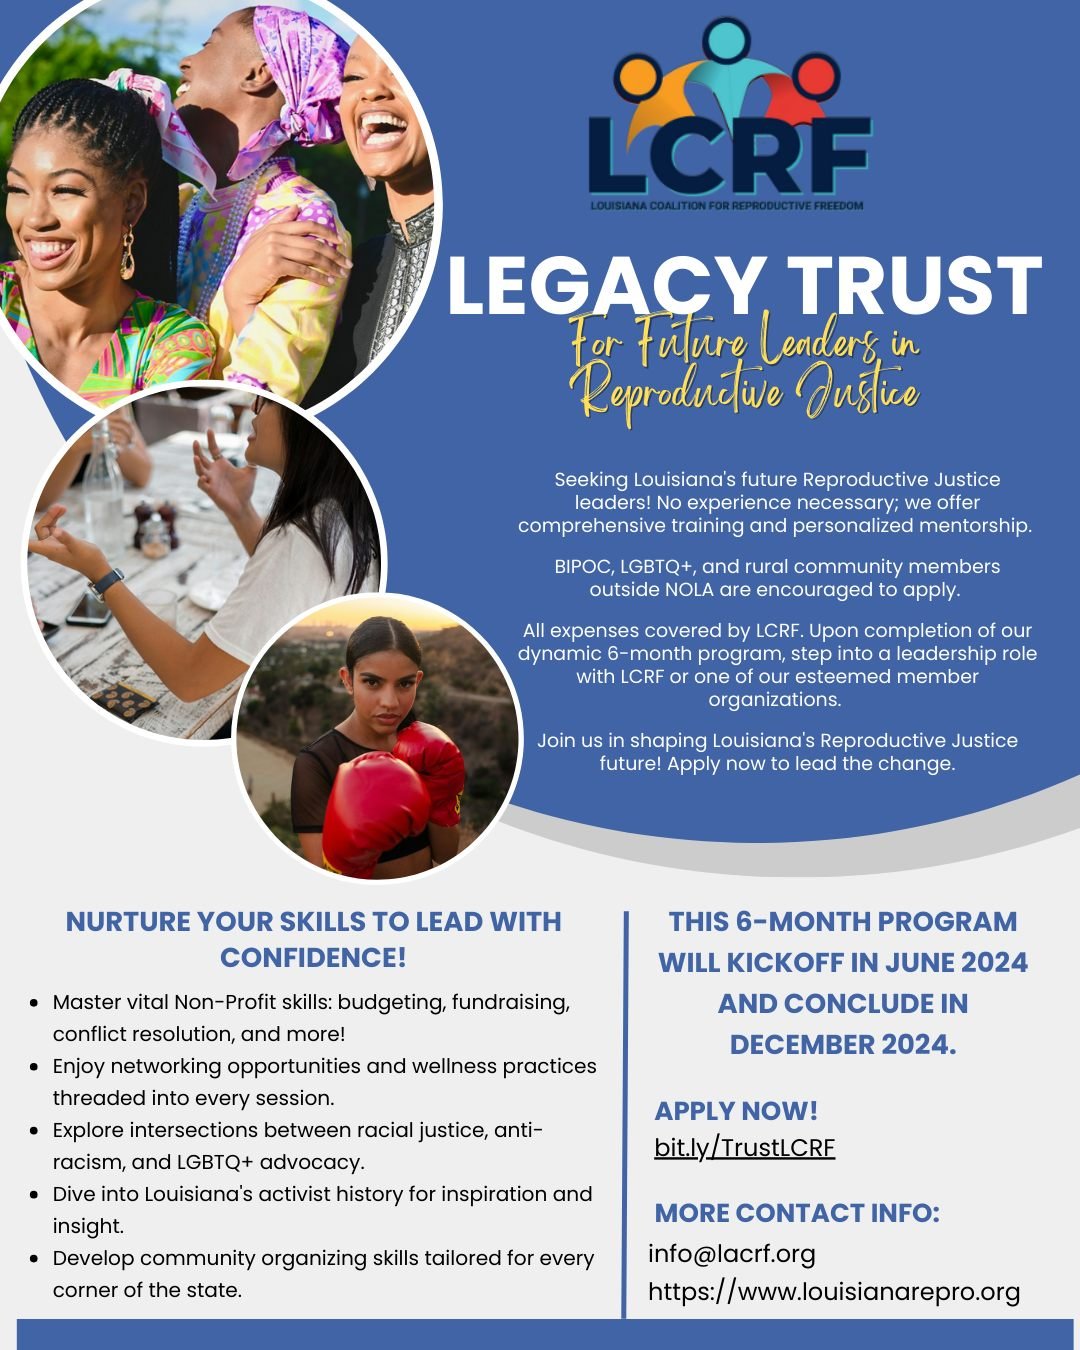 Do you know a Reproductive Justice rockstar? Nominate them for the Legacy Trust, LCRF's all-expenses-paid Leadership Development and Mentorship program! Nominate emerging leaders here: https://forms.gle/373Av7tYGs9MdYPj6